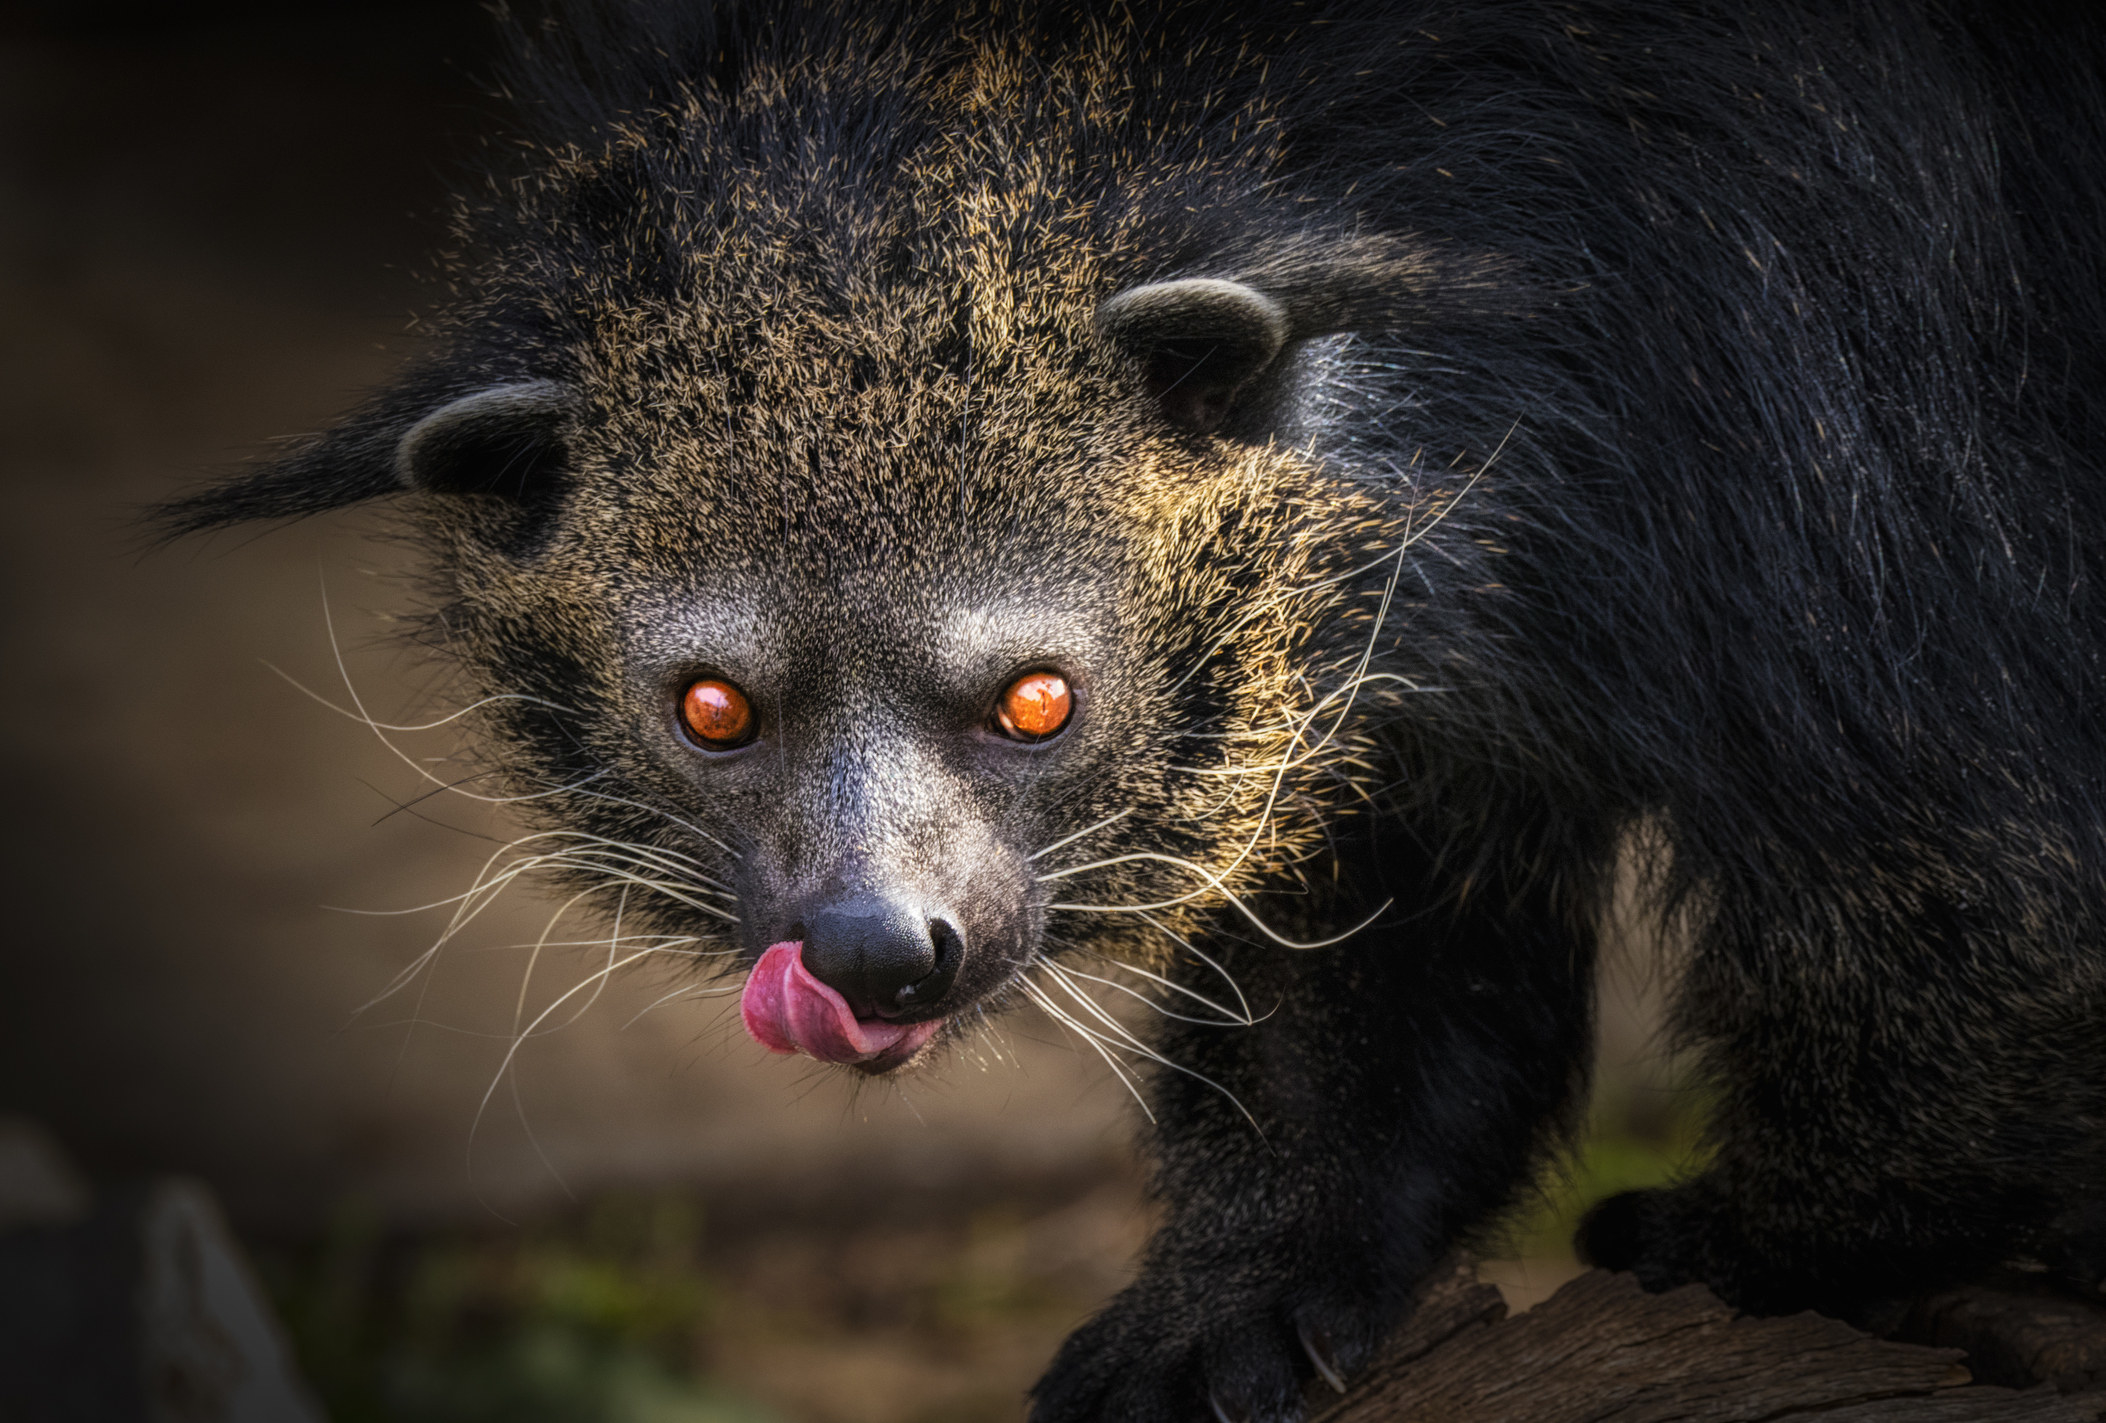 A red eyed animal with messy whiskers and fur 